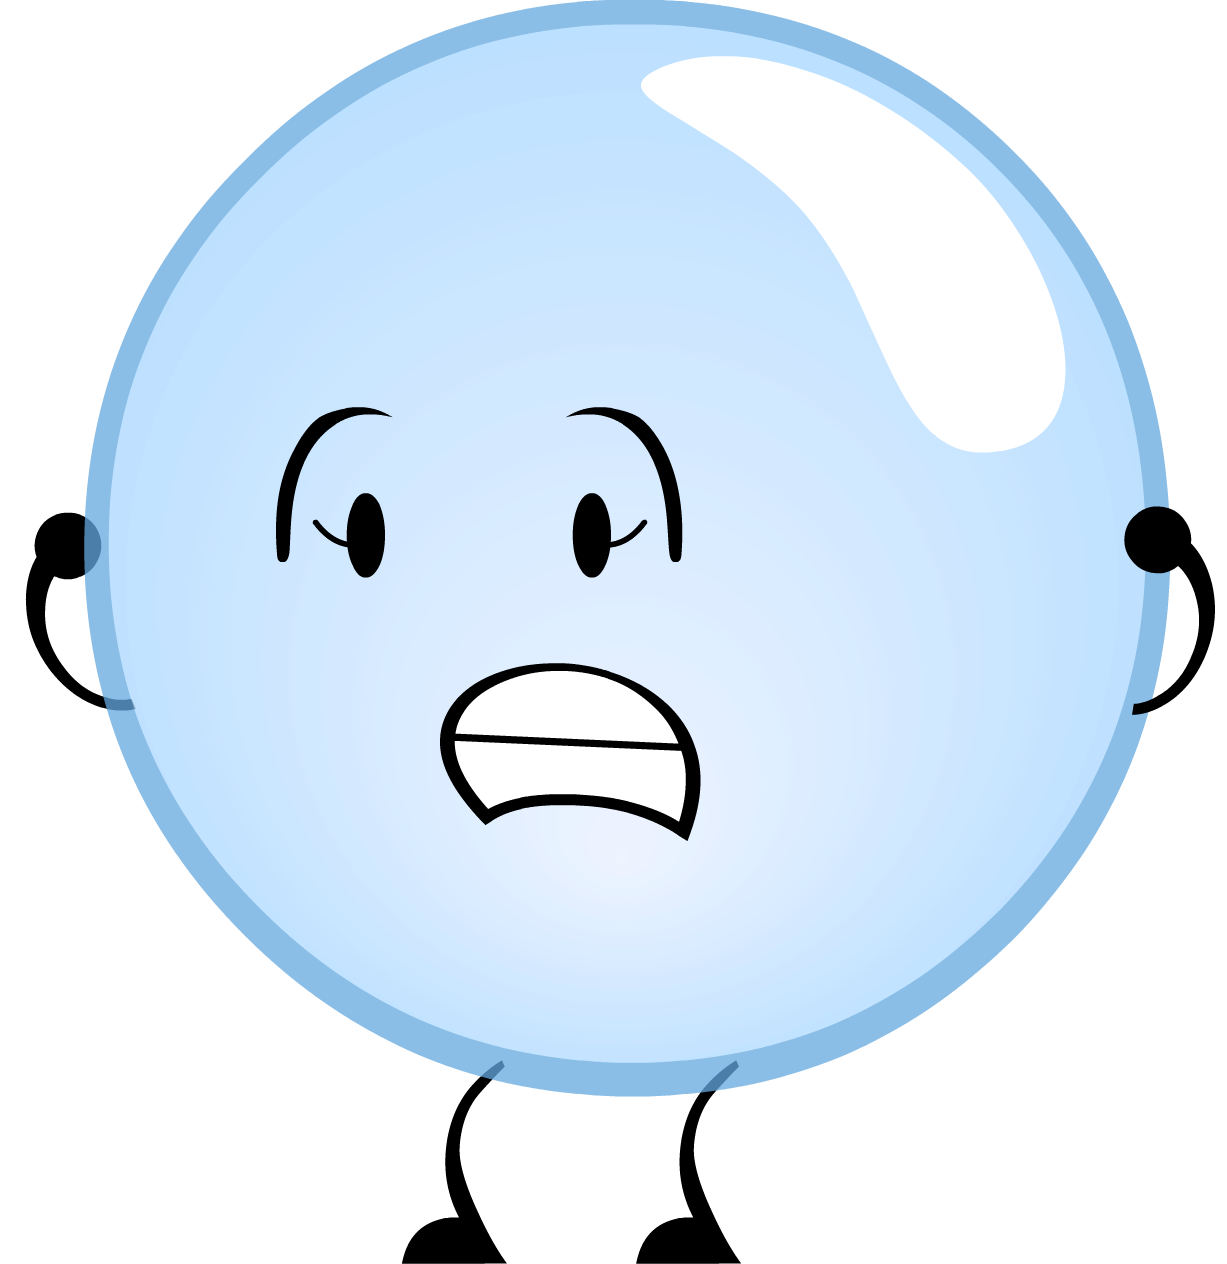 Startled bfdi character